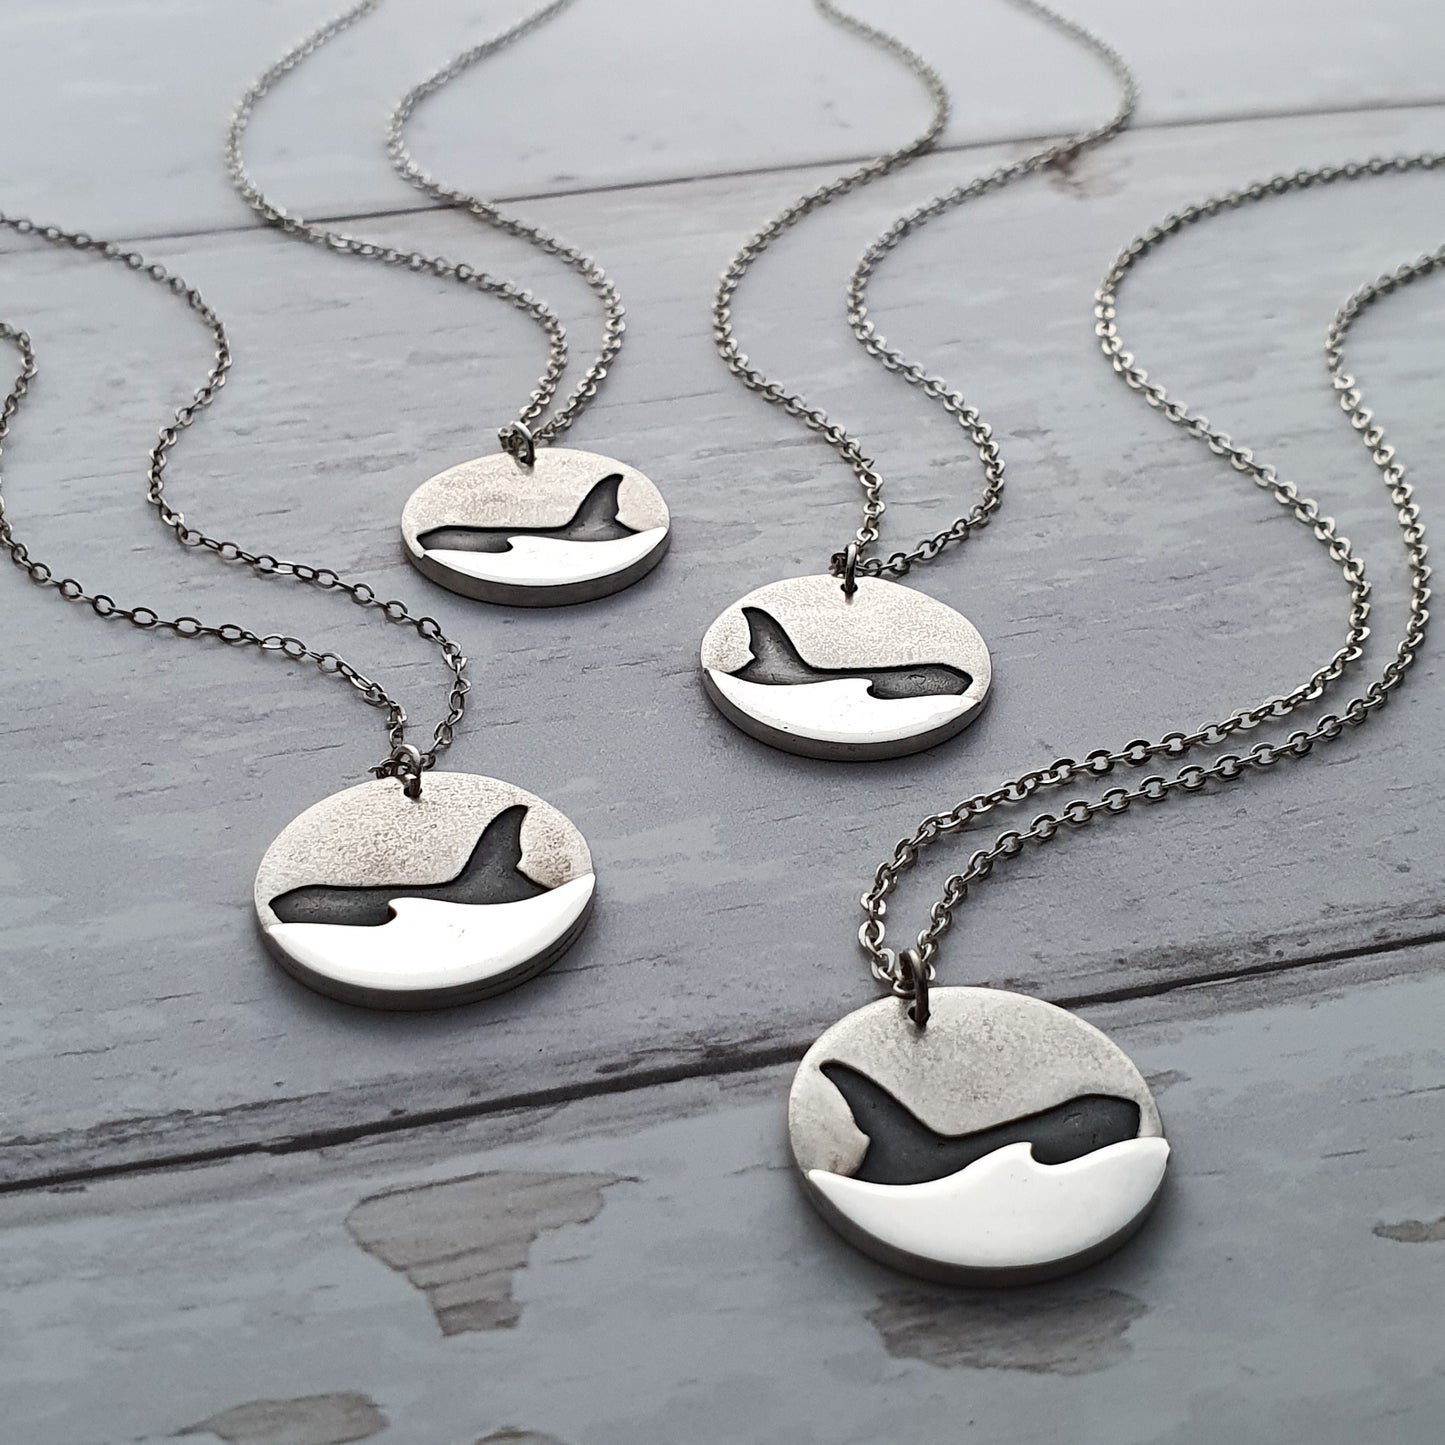 Sterling Silver killer whale necklaces